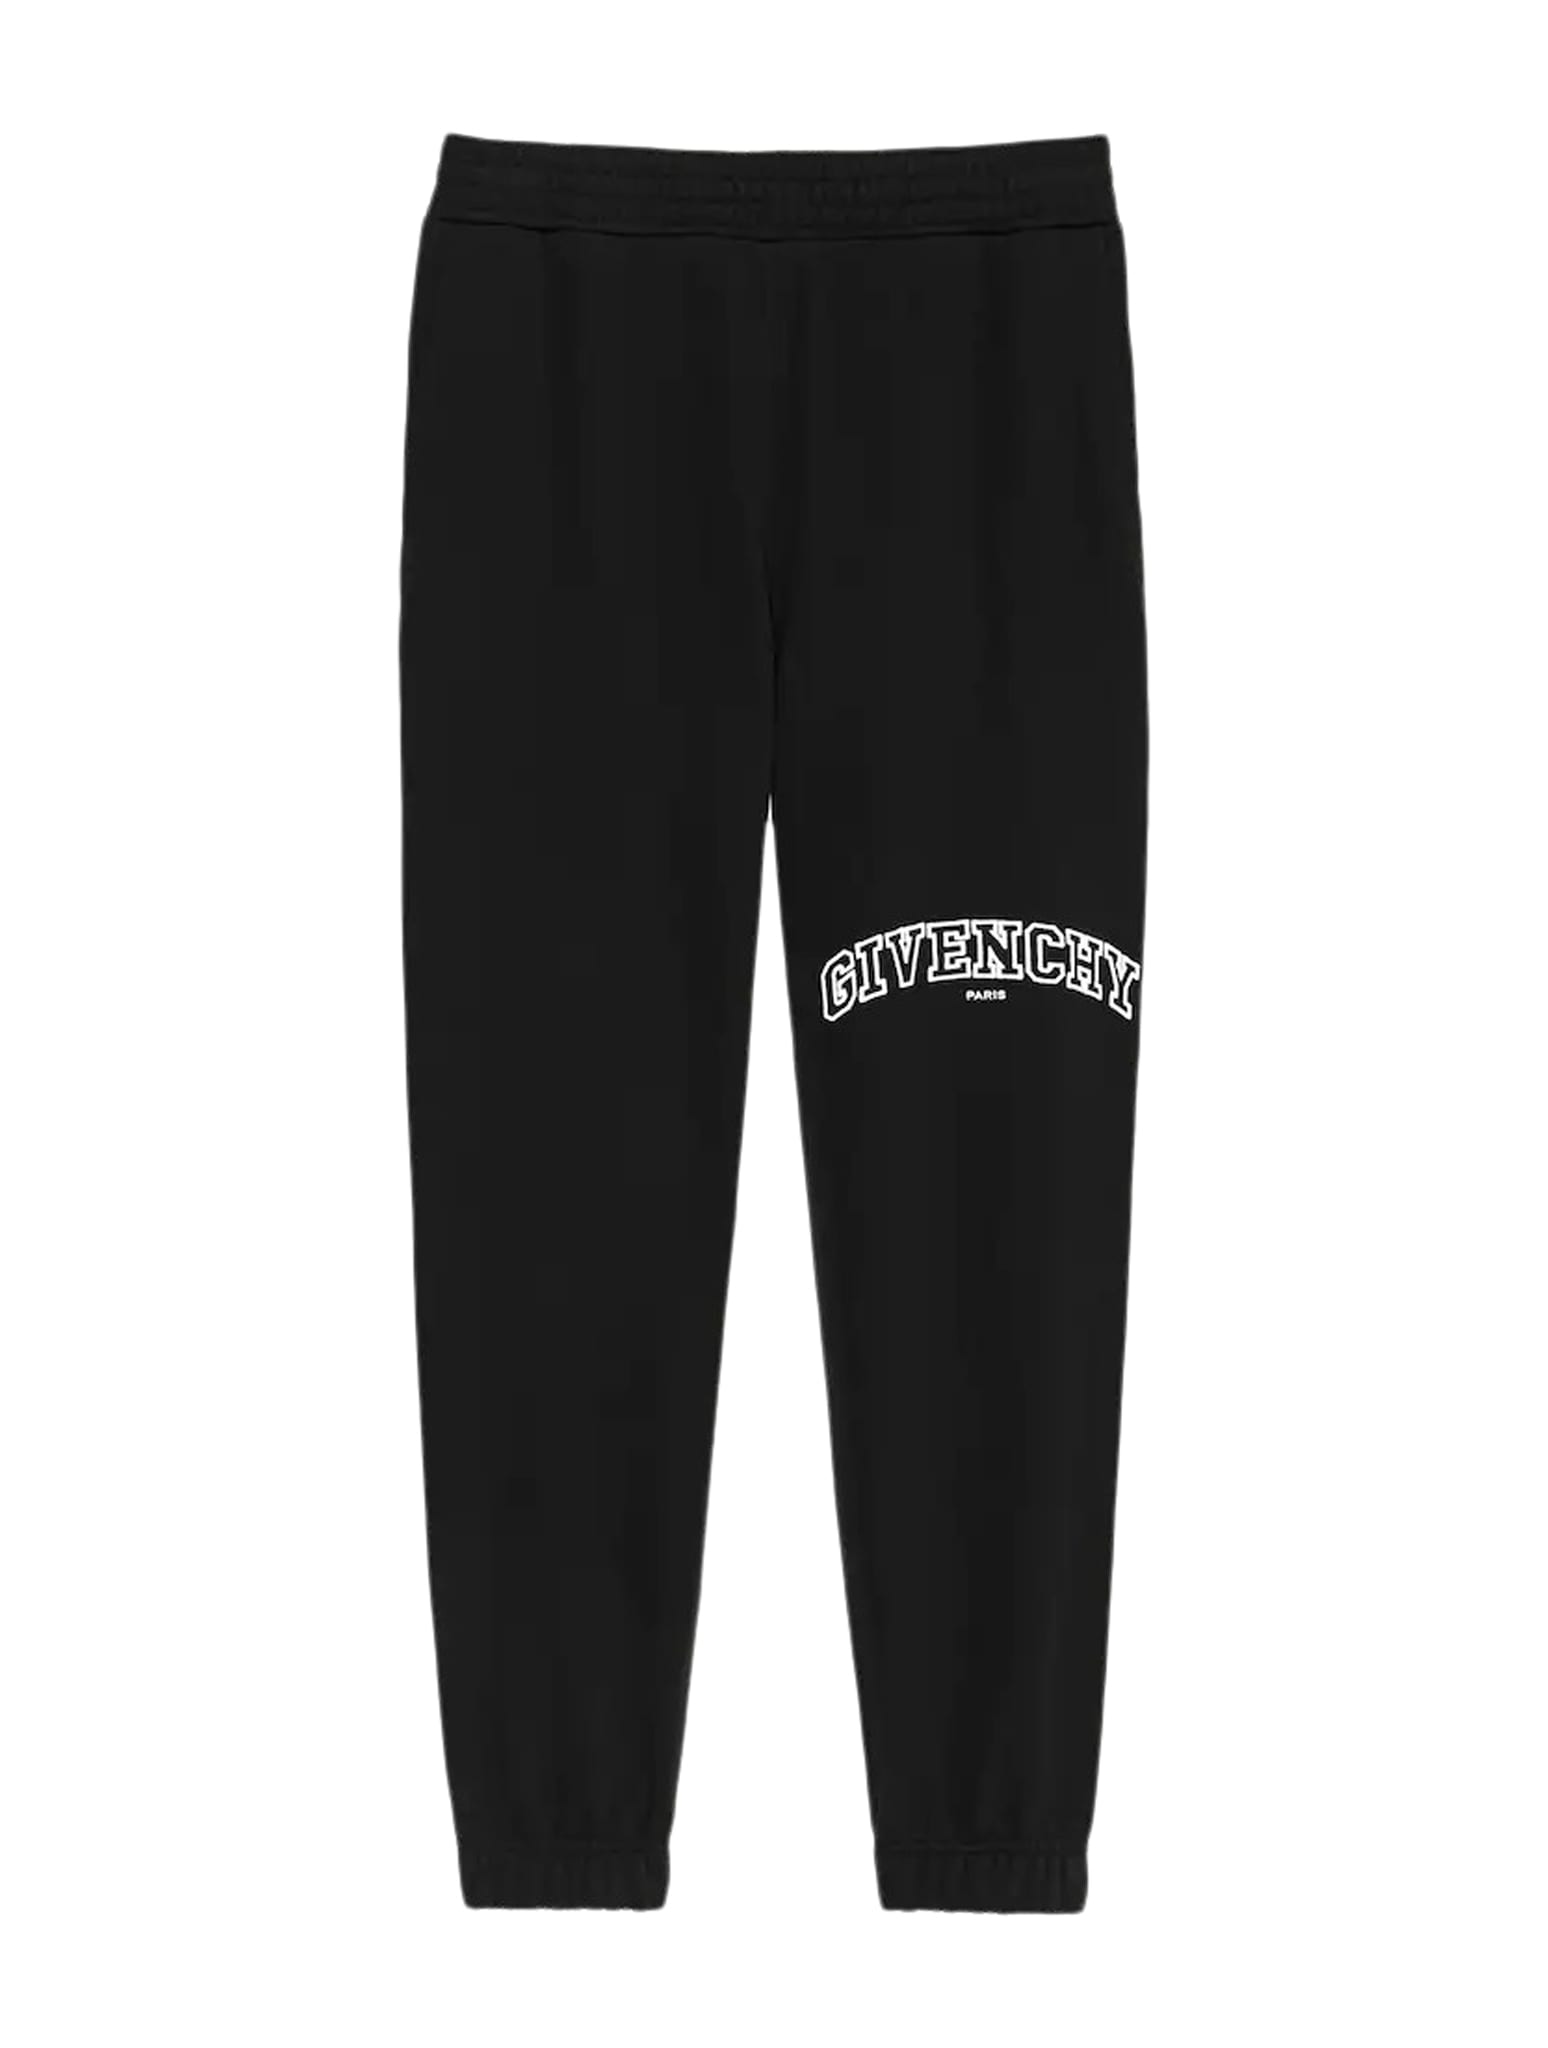 Givenchy Slim Fit Jogging W/ Embroidery